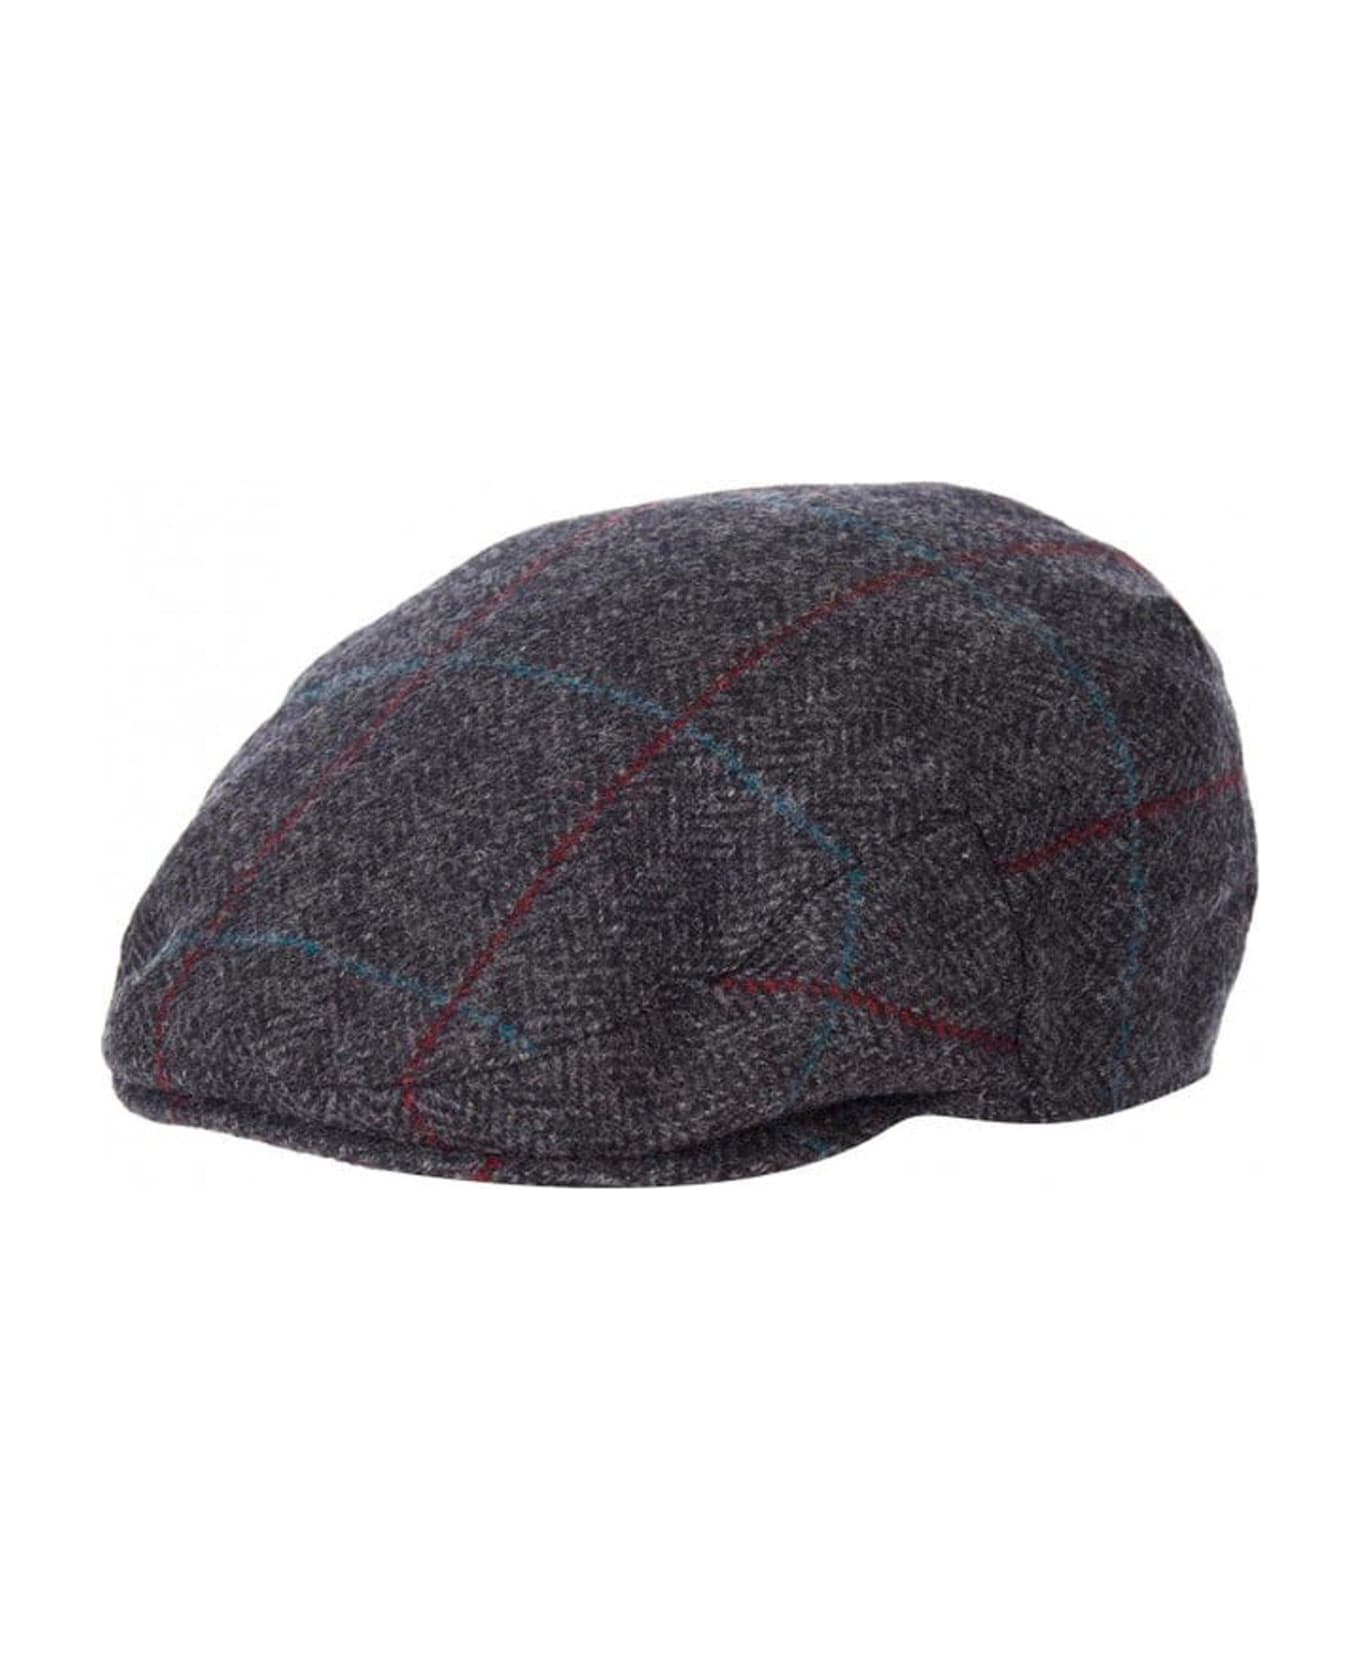 Barbour Crieff Flat Cap - Charcoal/red/blue